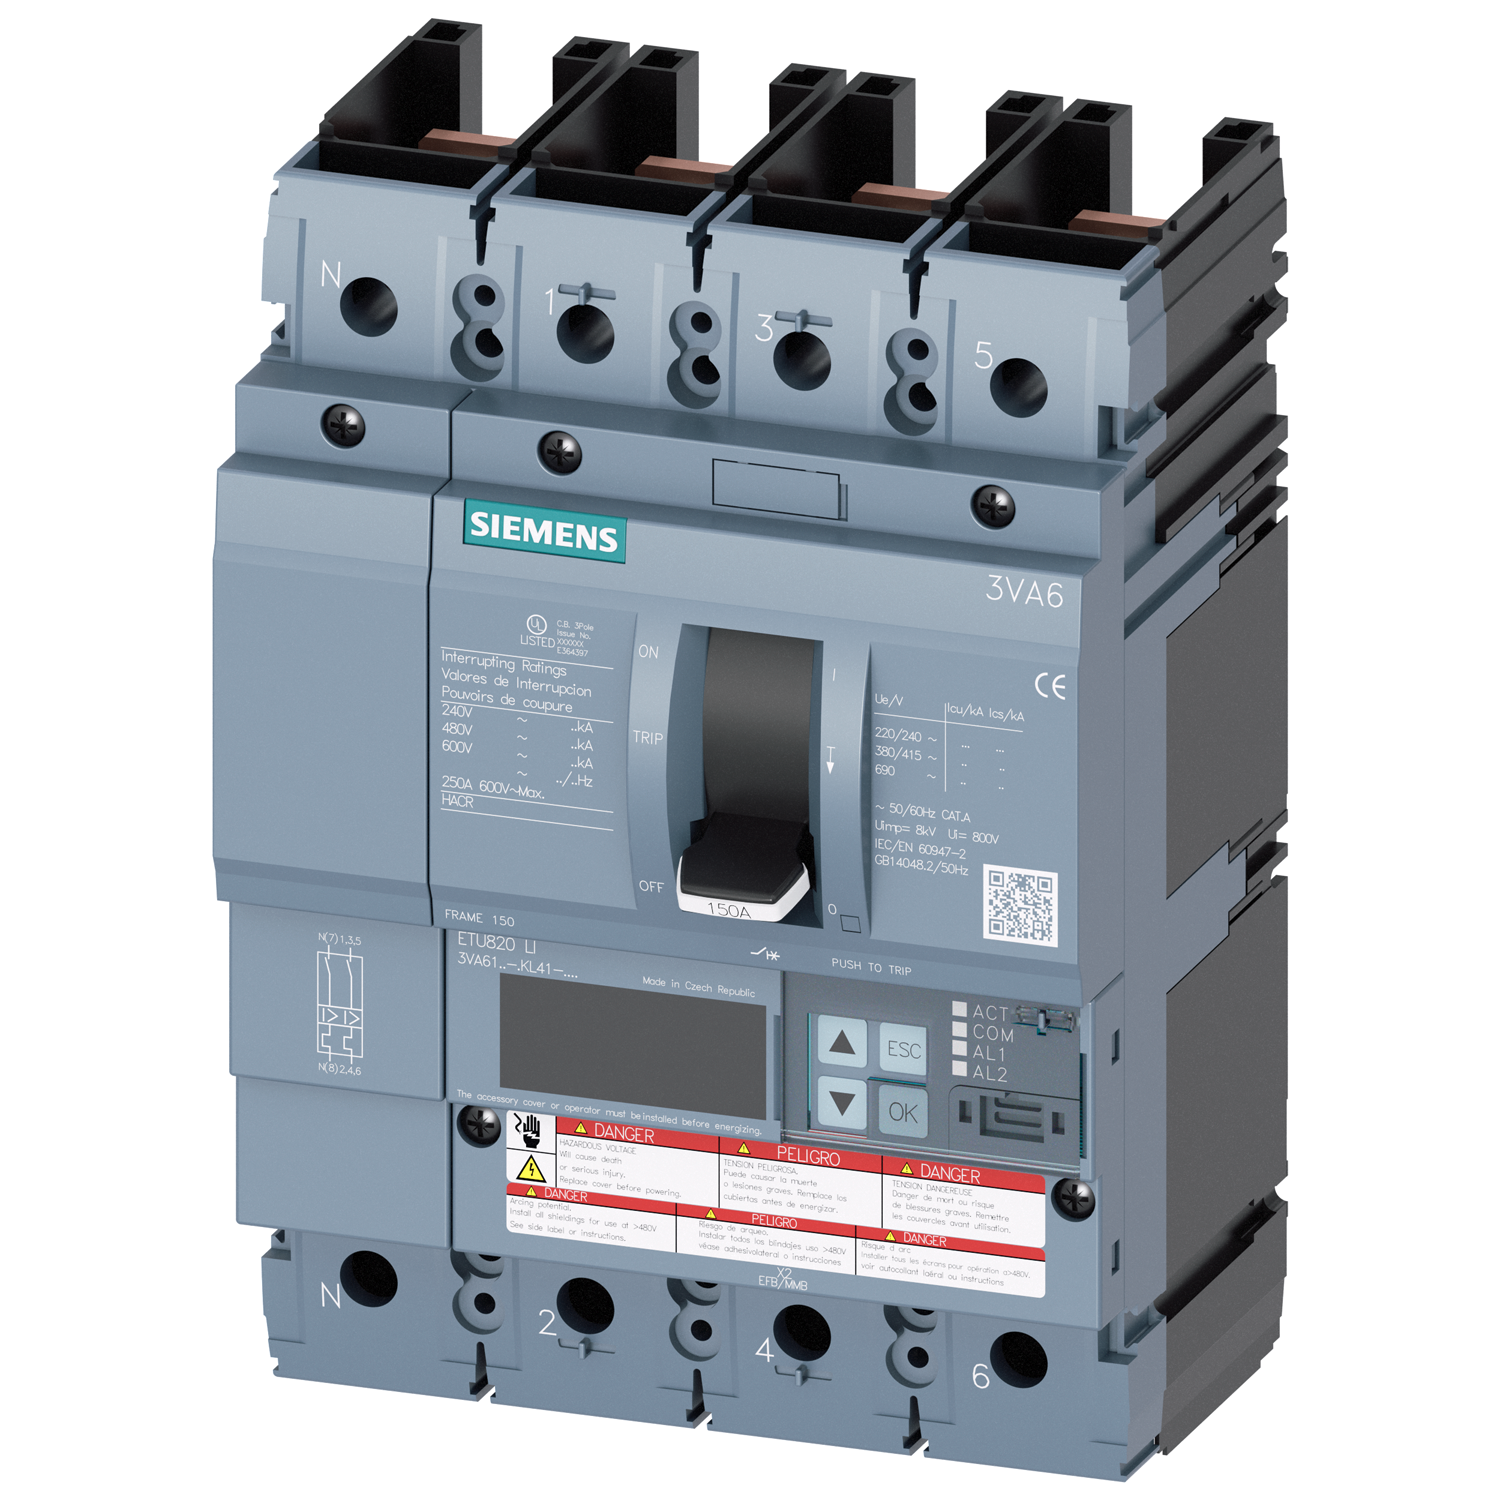 SIEMENS LOW VOLTAGE 3VA UL MOLDED CASE CIRCUIT BREAKER WITH ELECTRONIC TRIP UNIT. 3VA61 FRAME WITH MEDIUM (CLASS M) BREAKING CAPACITY. 100A 4-POLE (18KAIC AT 600V) (35KAIC AT 480V). ETU820 TRIP UNIT LCD LI WITH METERING. SPECIAL FEATURES WITHOUT LUGS. DIMENSIONS (W x H x D) IN 5.5 x 7.8 x 4.2.